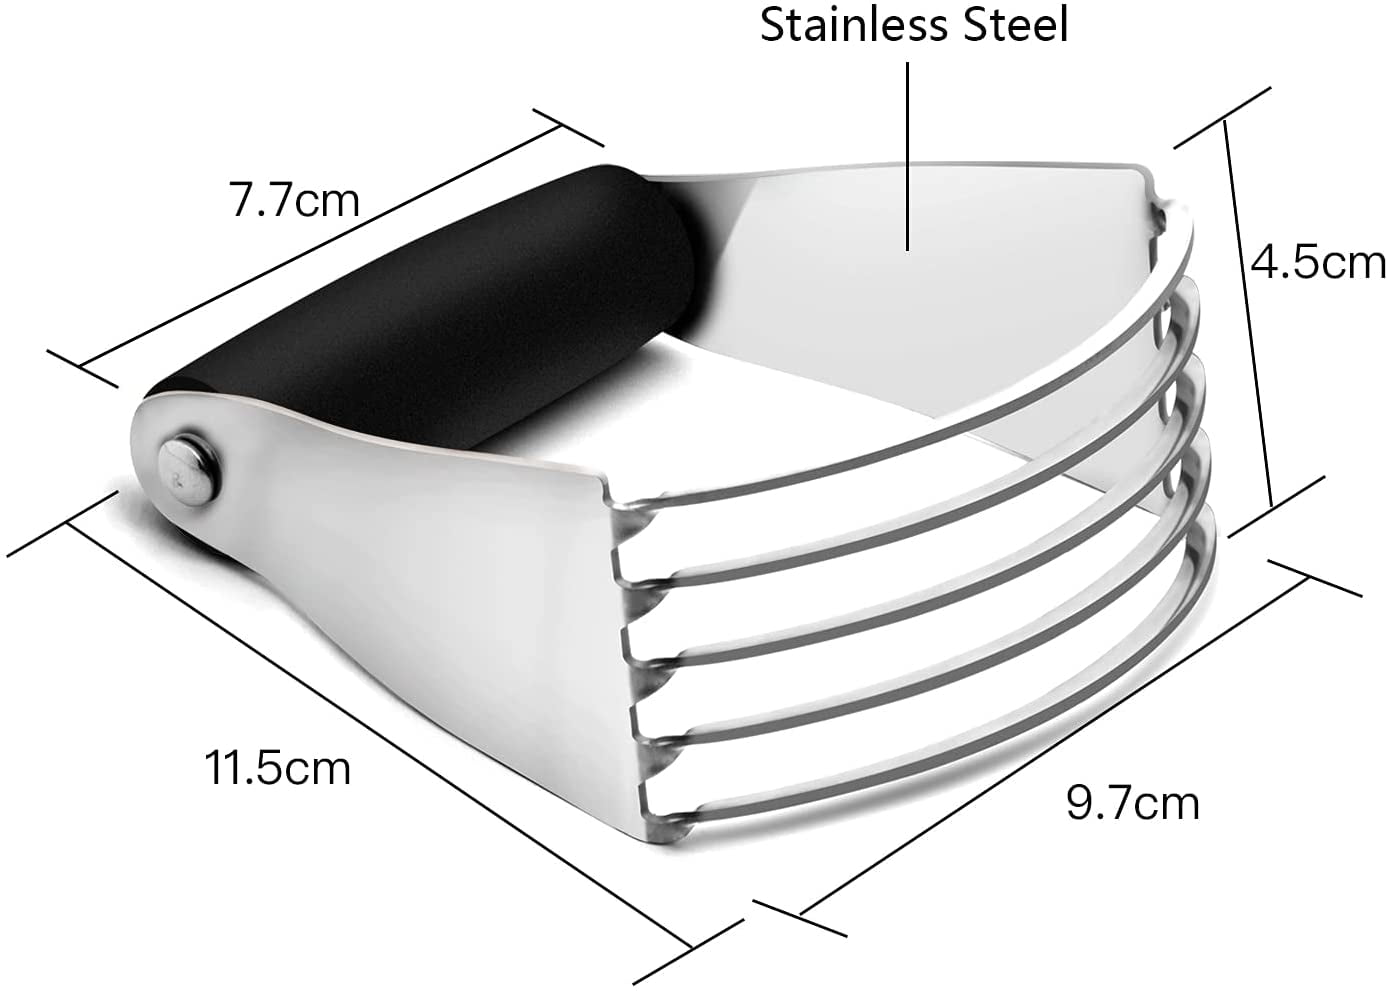 Pastry Cutter - Stainless Steel Pastry Blender & Dough Cutter, Non-Slip  Handle - Dishwasher Safe 